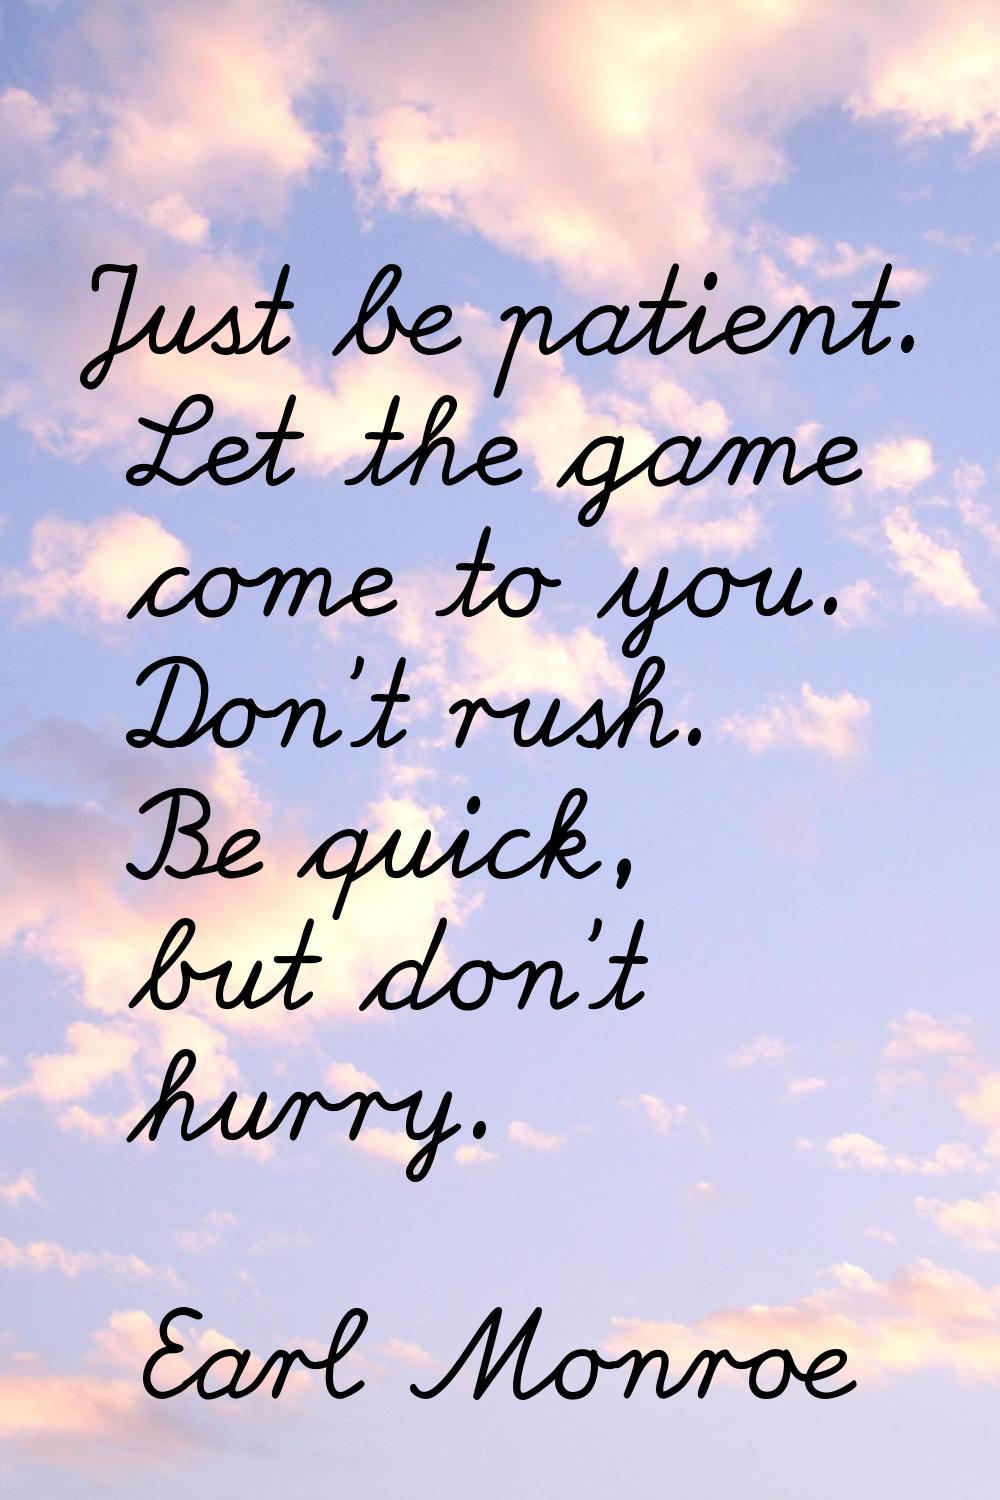 Just be patient. Let the game come to you. Don't rush. Be quick, but don't hurry.